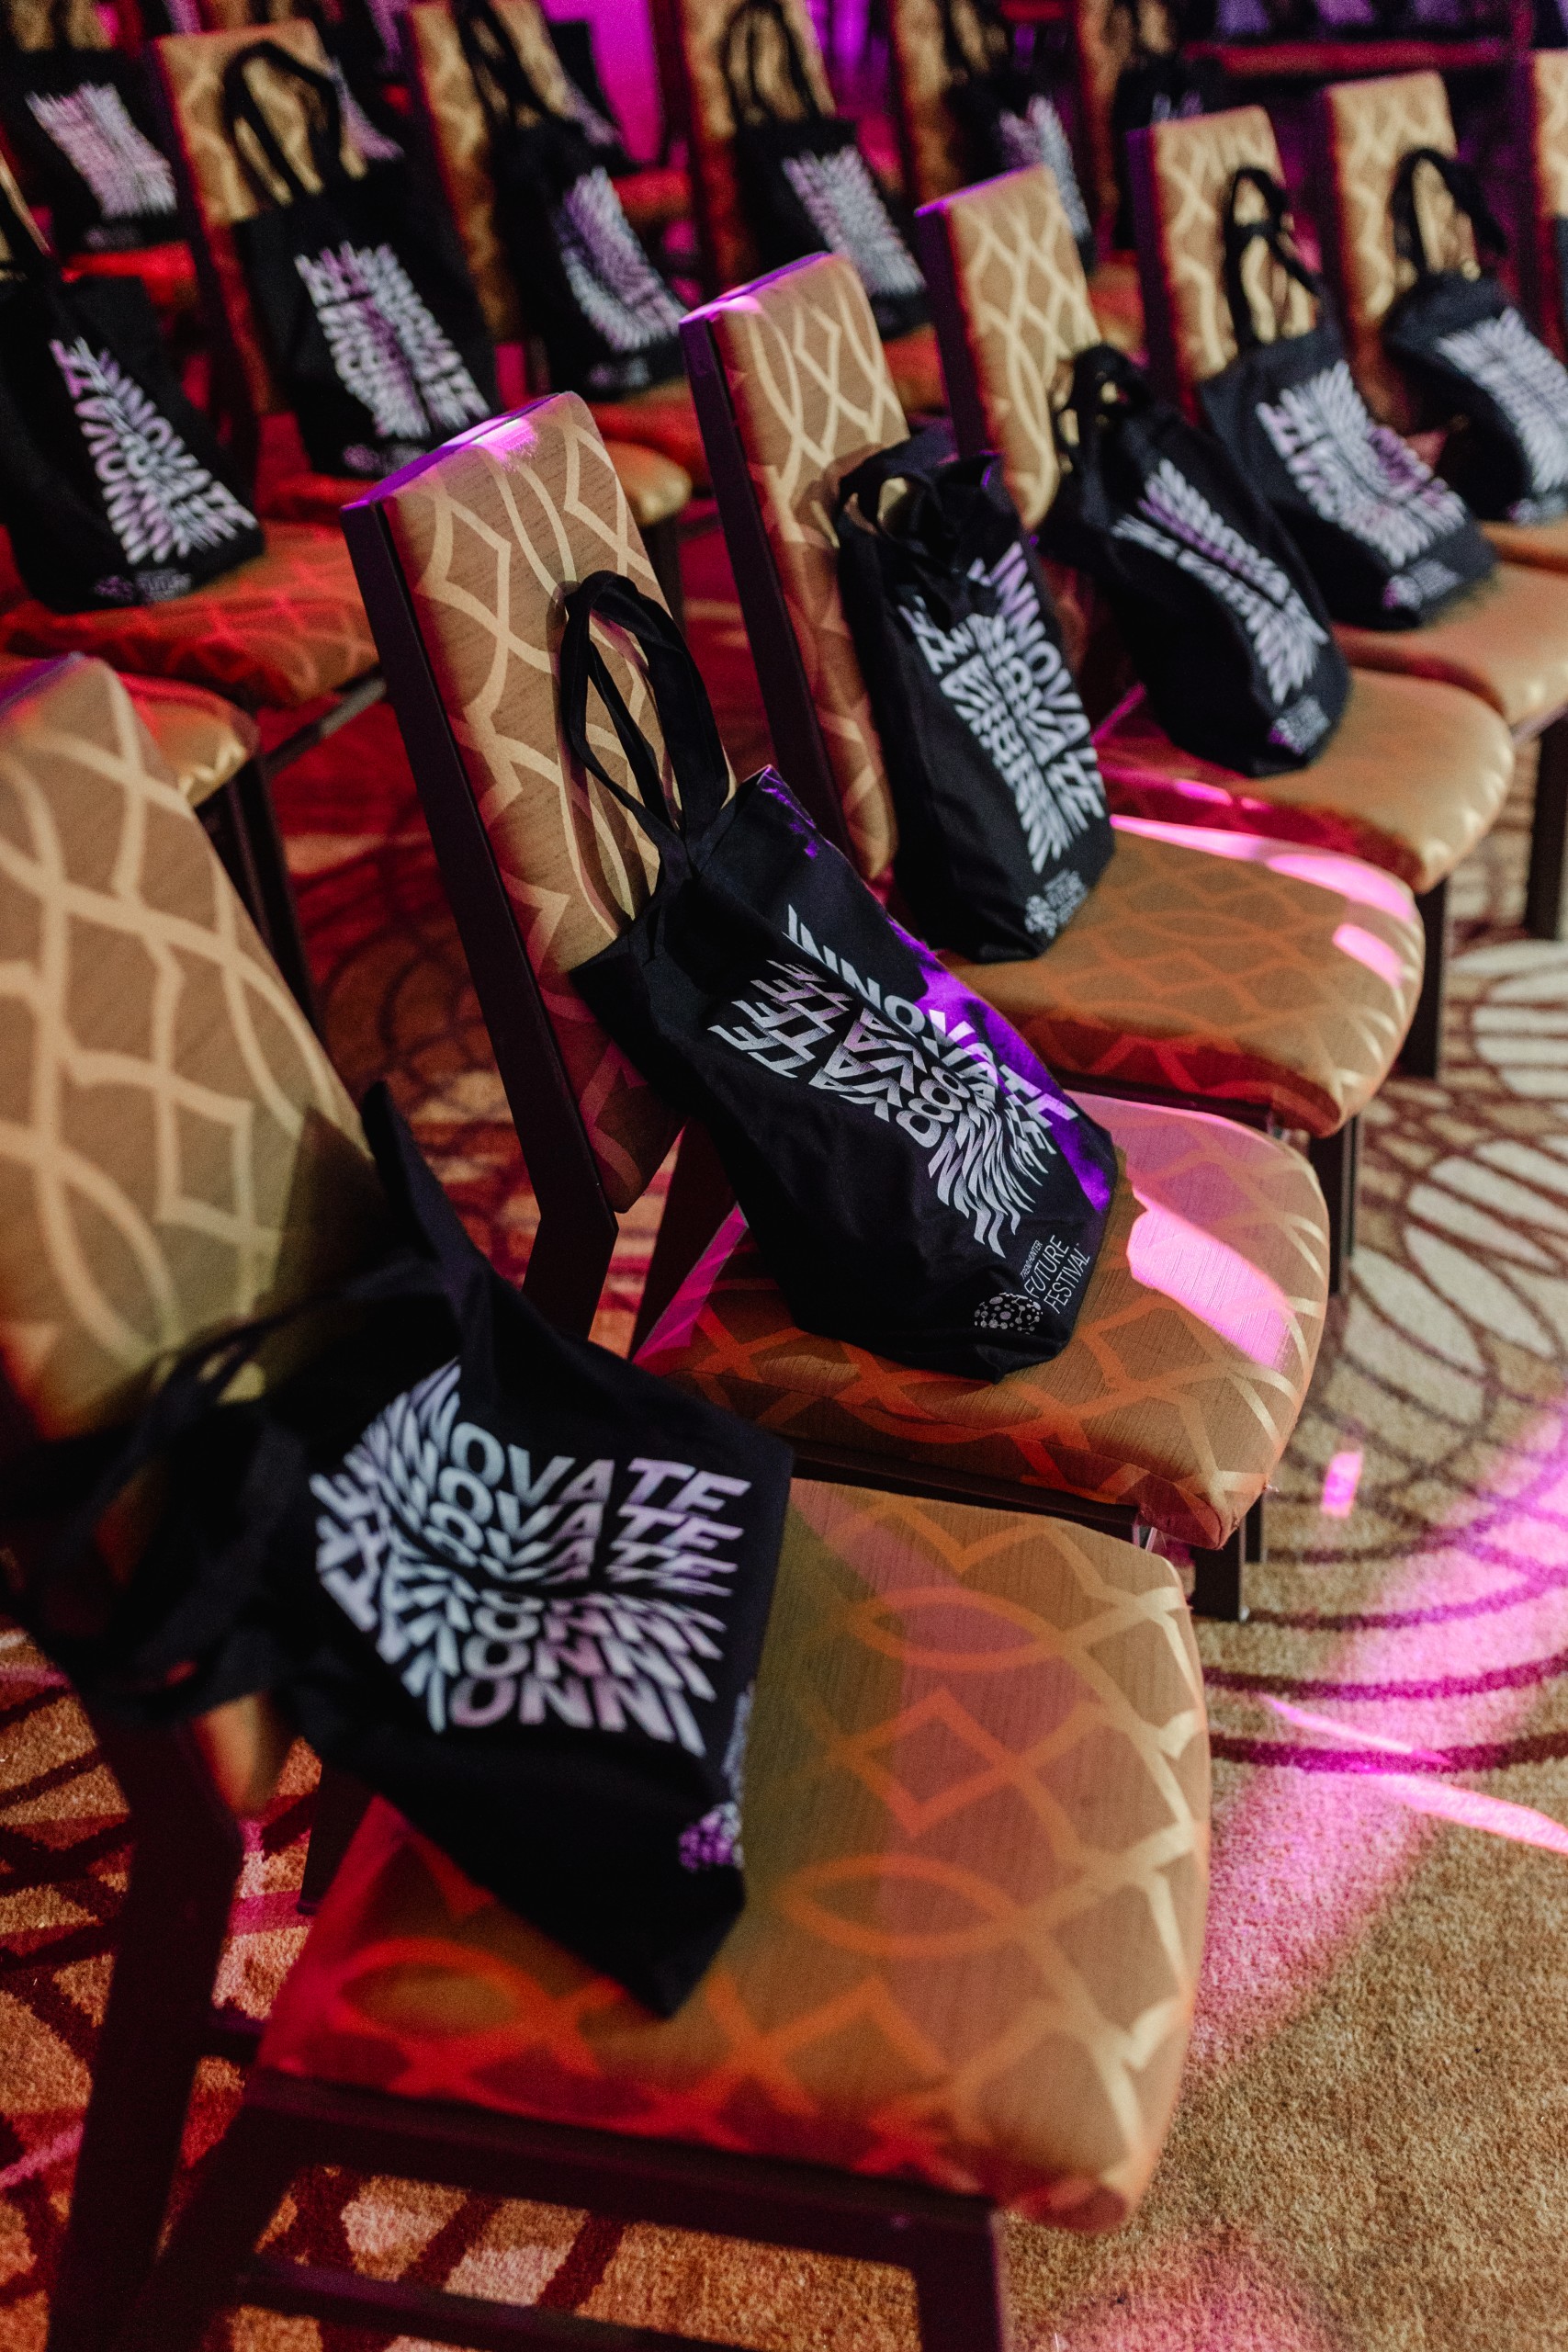 Event photography: A row of chairs with tote bags in front of them, captured through the lens of a photographer documenting the event.